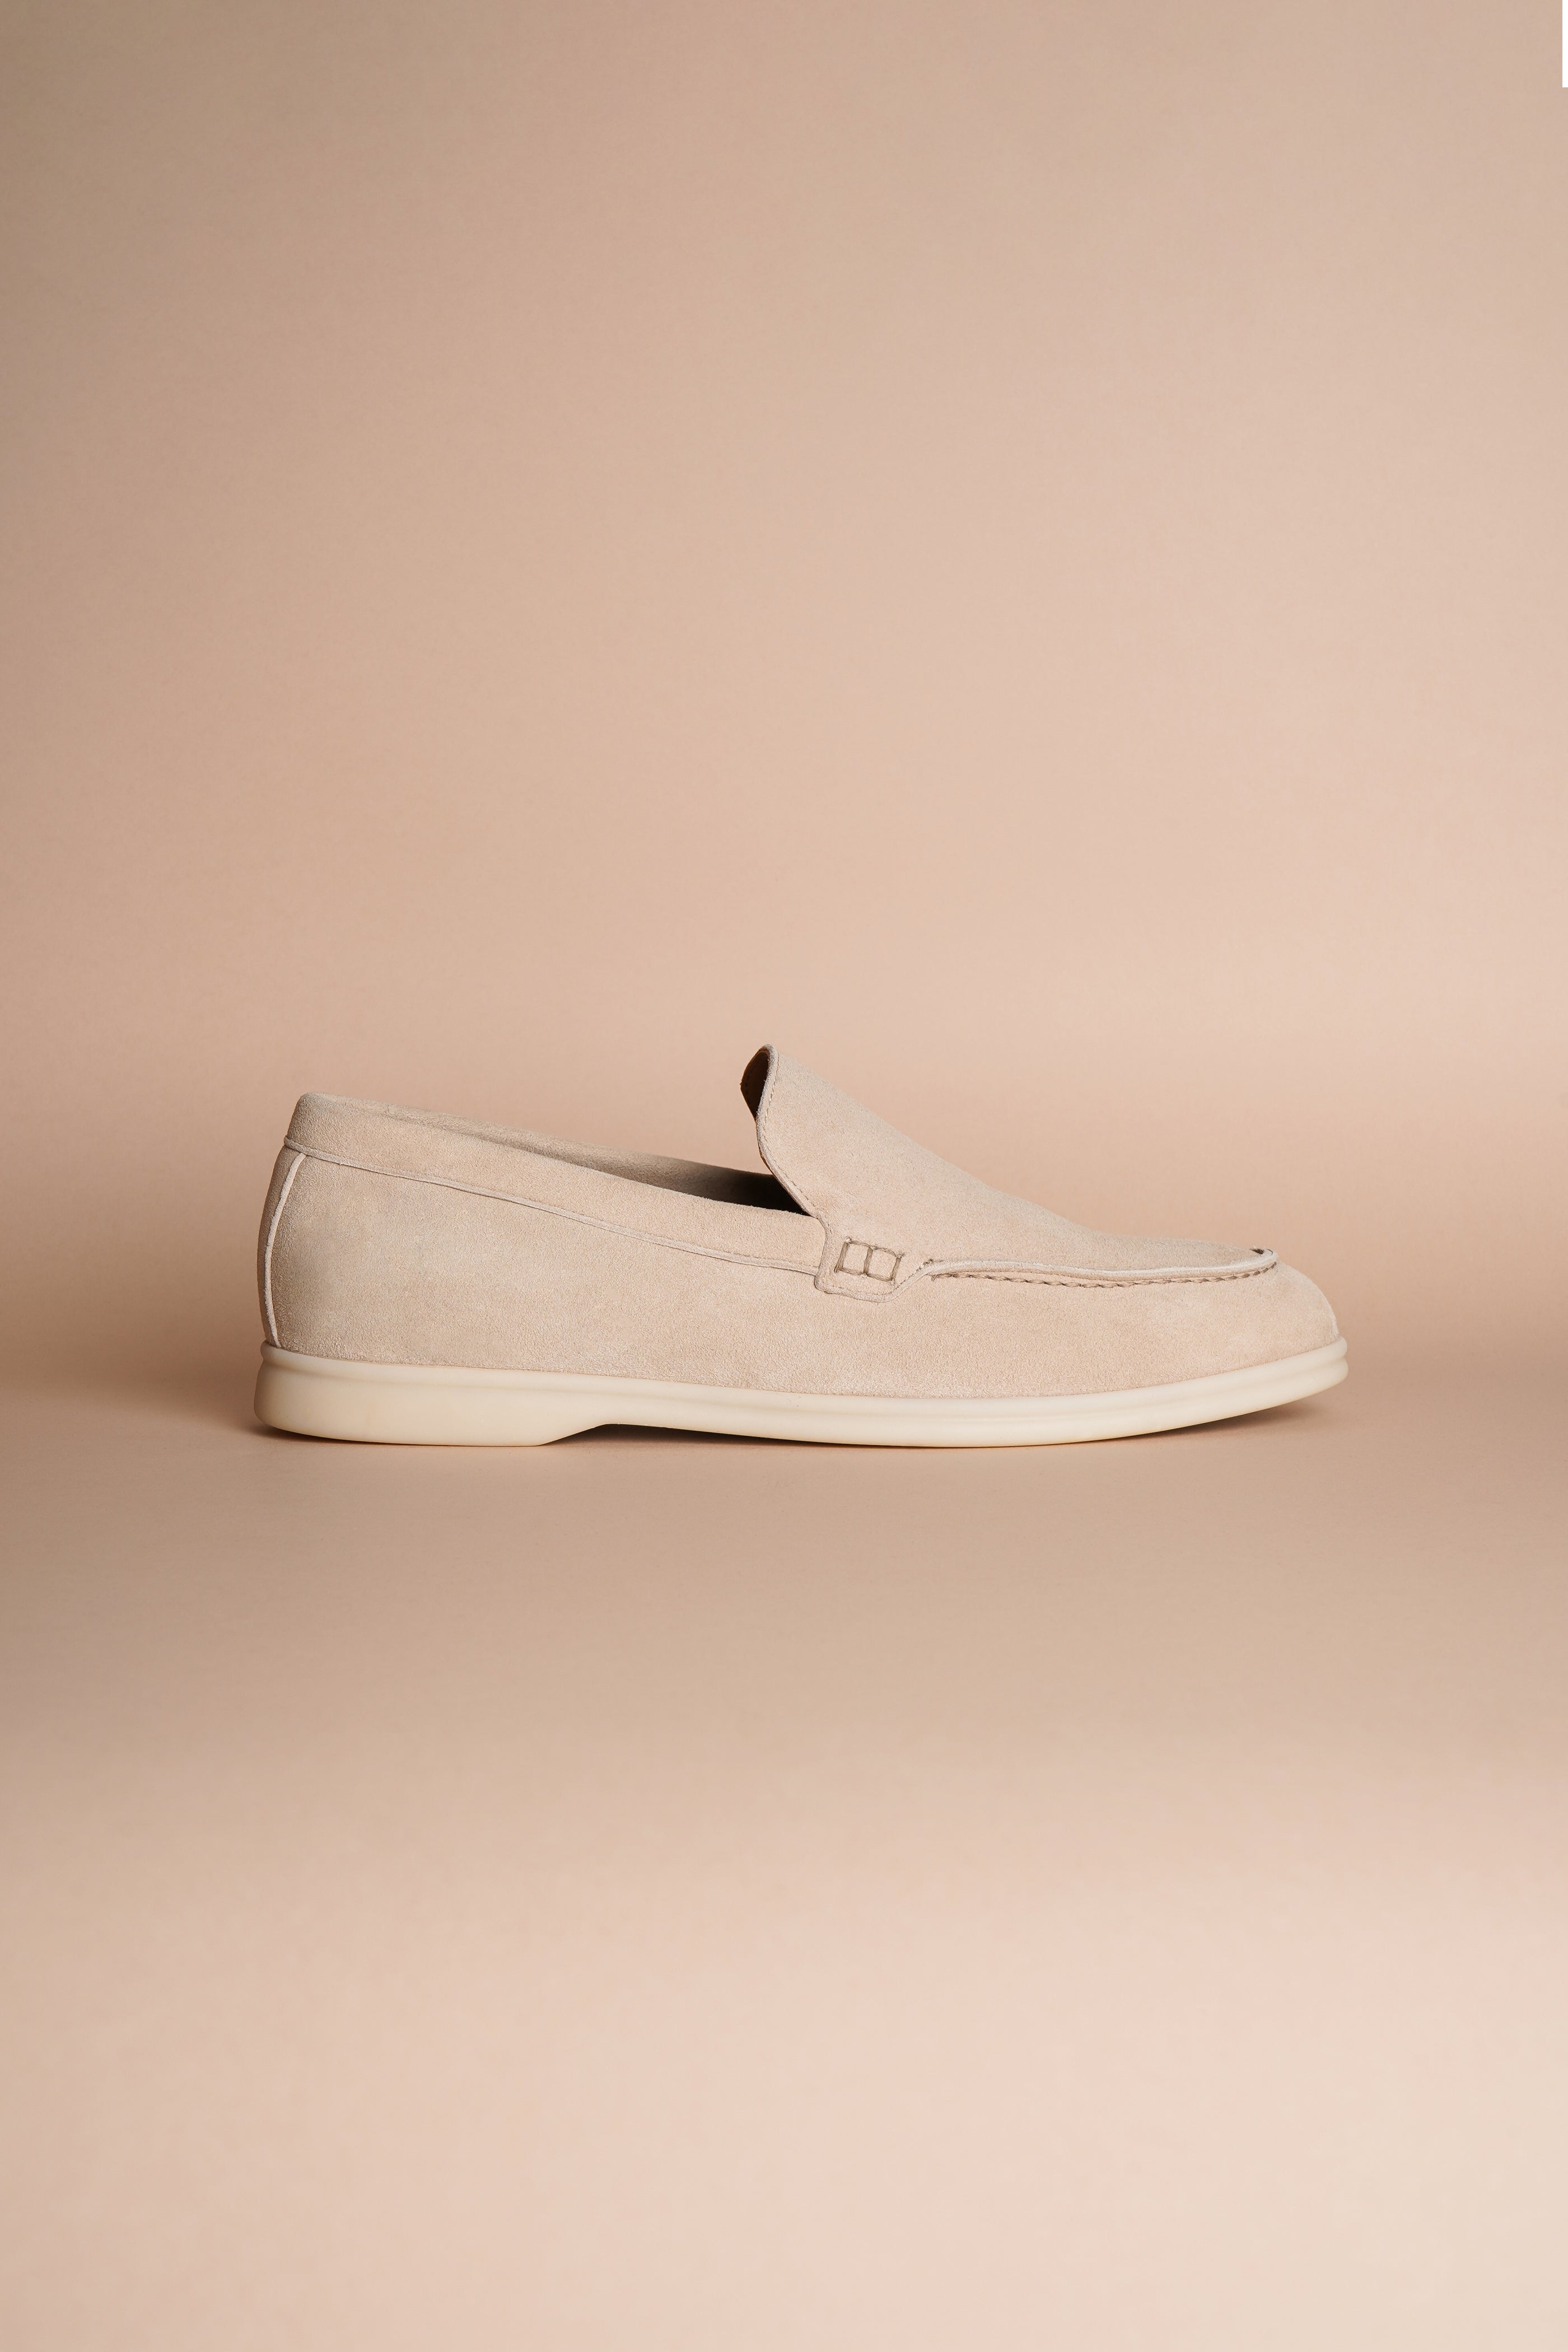 Beaumont Classic Suede Loafers